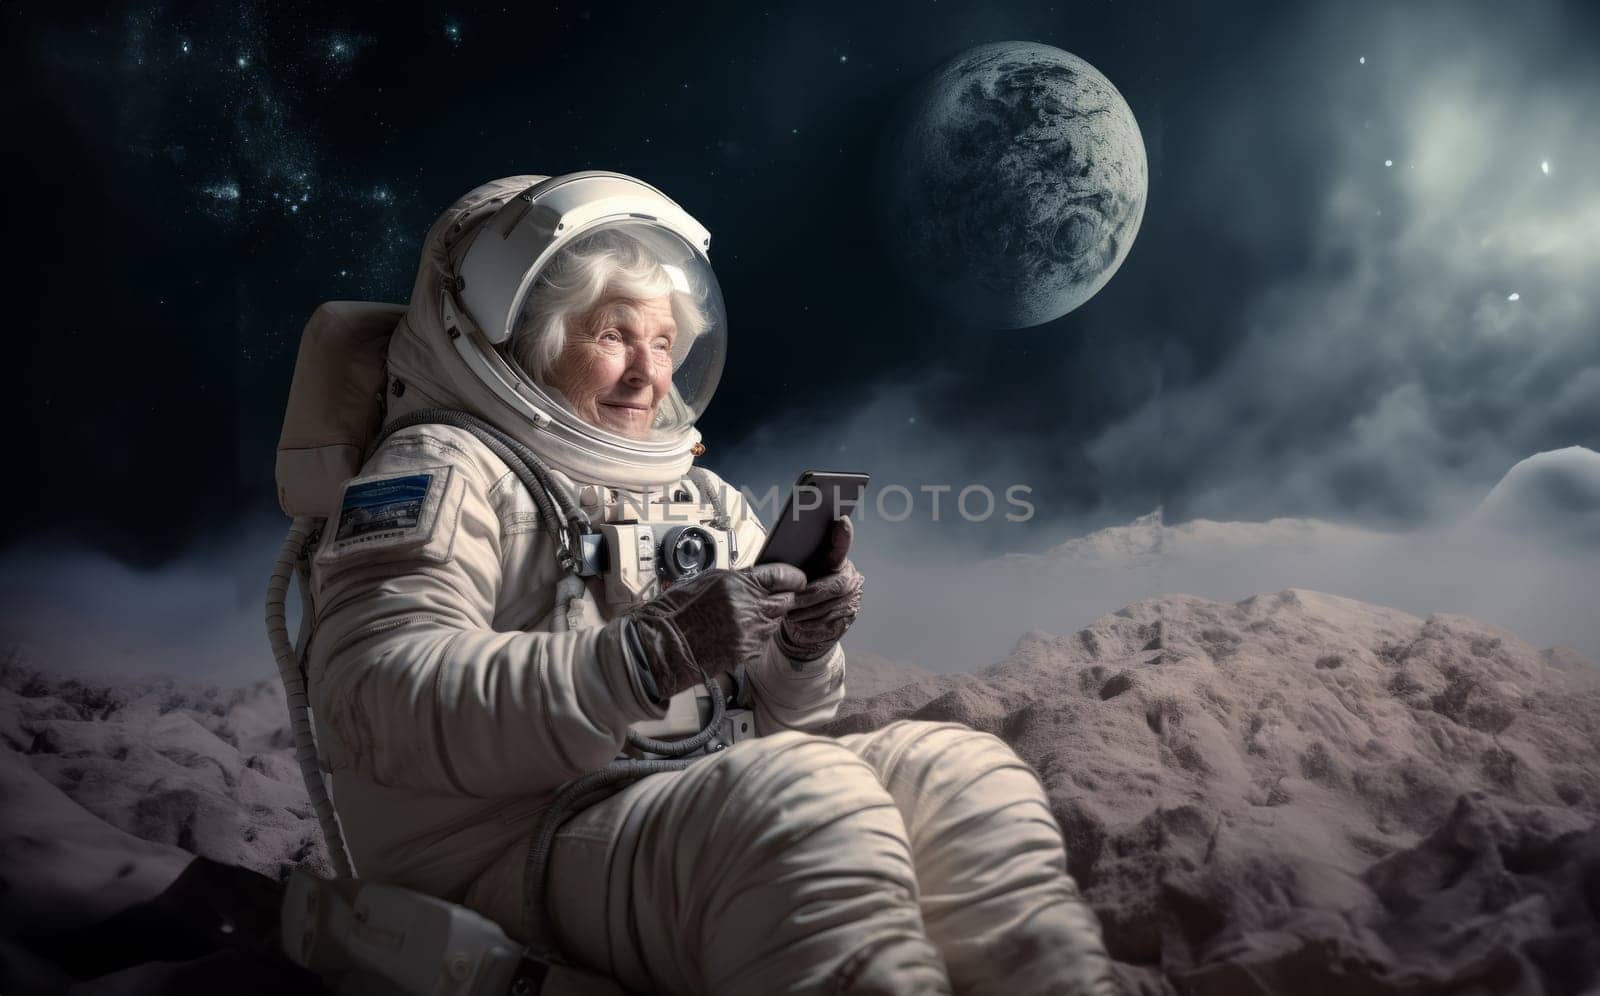 A grandmother astronaut takes a well-deserved break on the moon, checking her phone for messages from back home.